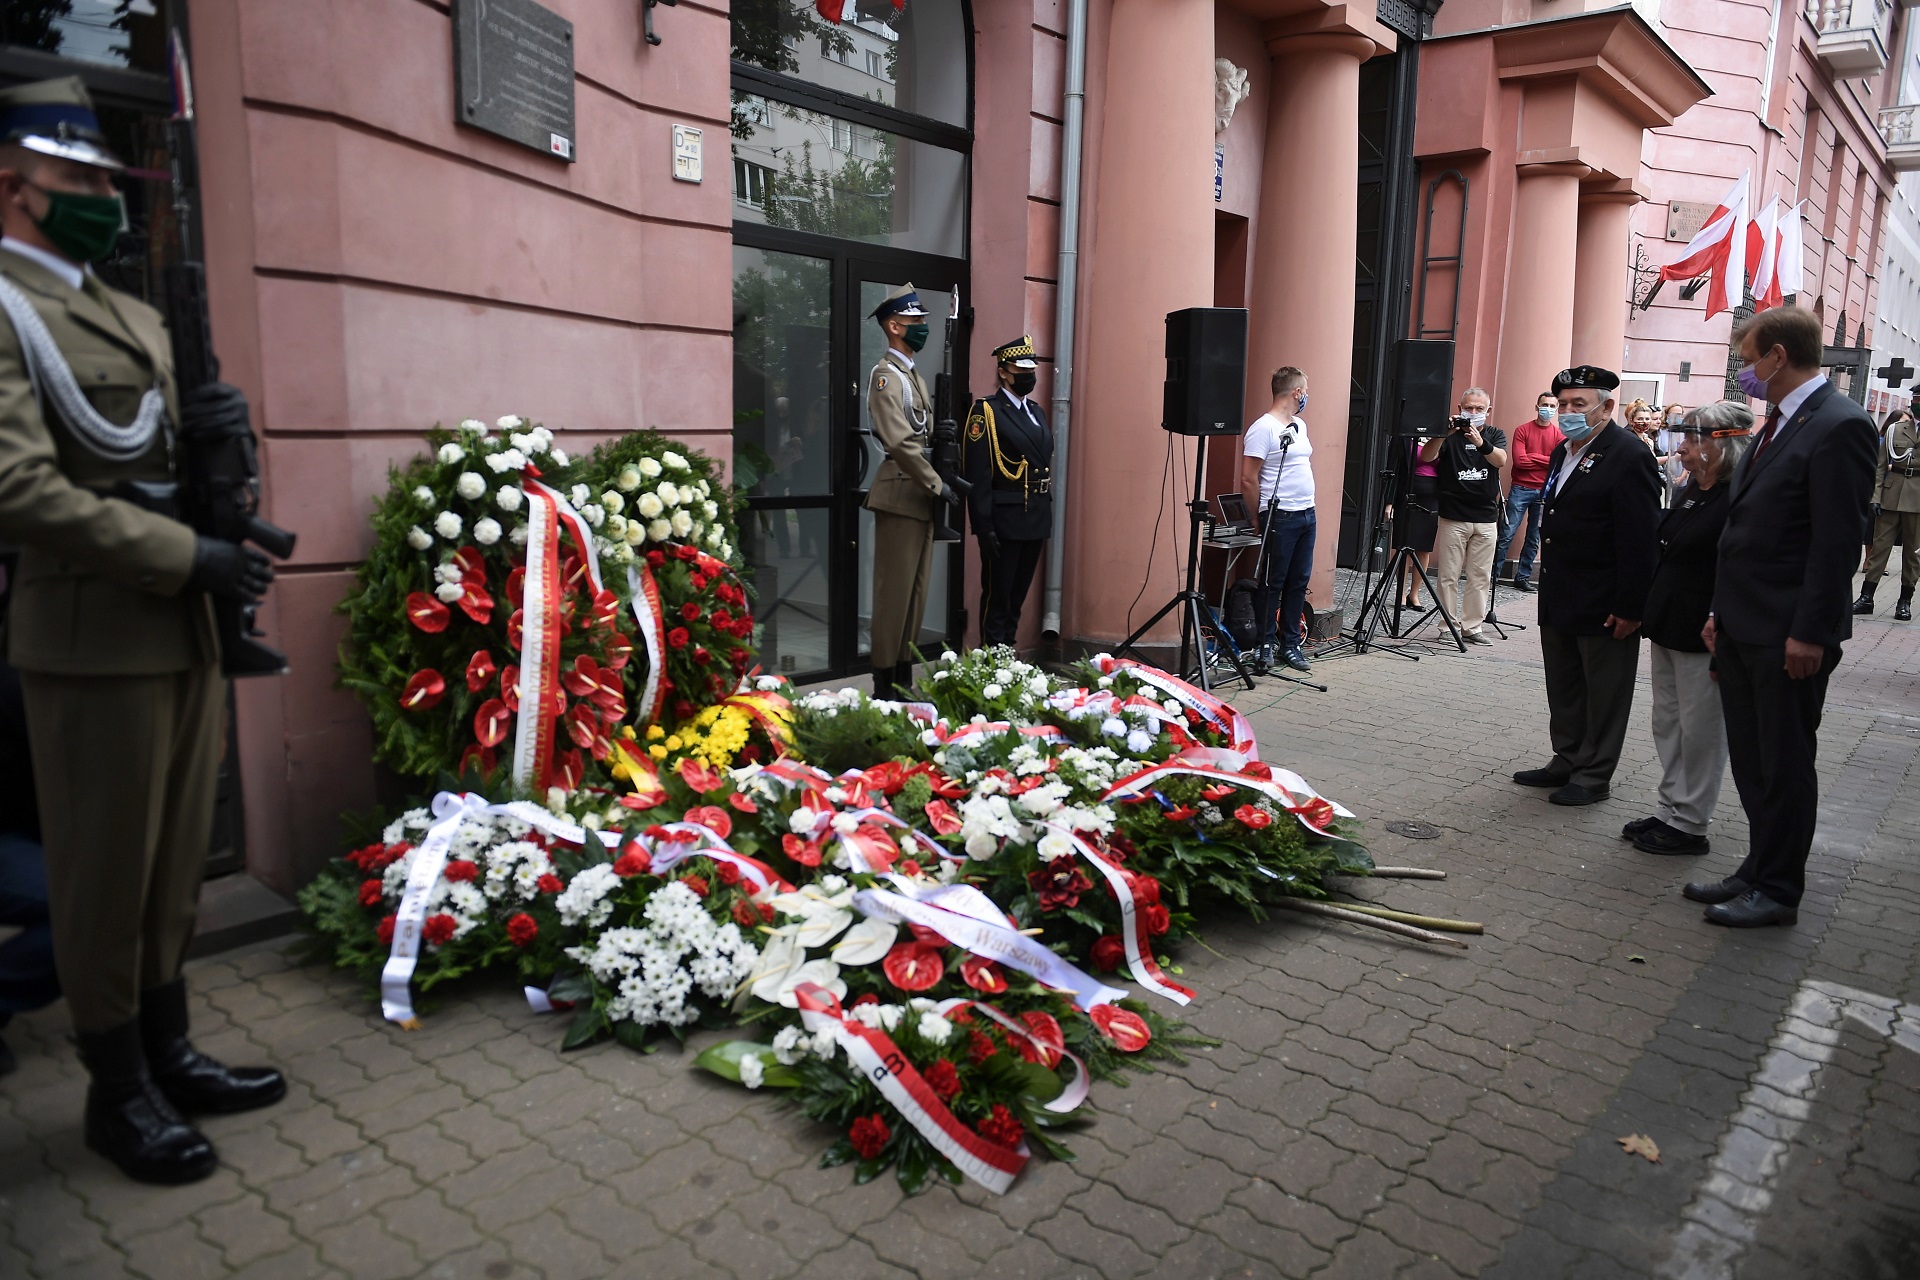 epa08578254 Authorities attend a wreath-laying ceremony at the plaque commemorating the signing of the order to start the Warsaw Uprising, at Filtrowa street in Warsaw, Poland, 01 August 2020. The ceremony was held on the occasion of the 76th anniversary of the Warsaw Uprising which started on 01 August 1944 as the biggest resistance operation in Nazi-occupied Europe. Initially intended to last several days, it continued for over two months before being suppressed by the Germans. The uprising claimed the lives of about 18,000 insurgents and around 180,000 civilians. After the uprising failed, the Nazis expelled the remaining inhabitants from the city and methodically blew it up, destroying it almost completely.  EPA/MARCIN OBARA POLAND OUT